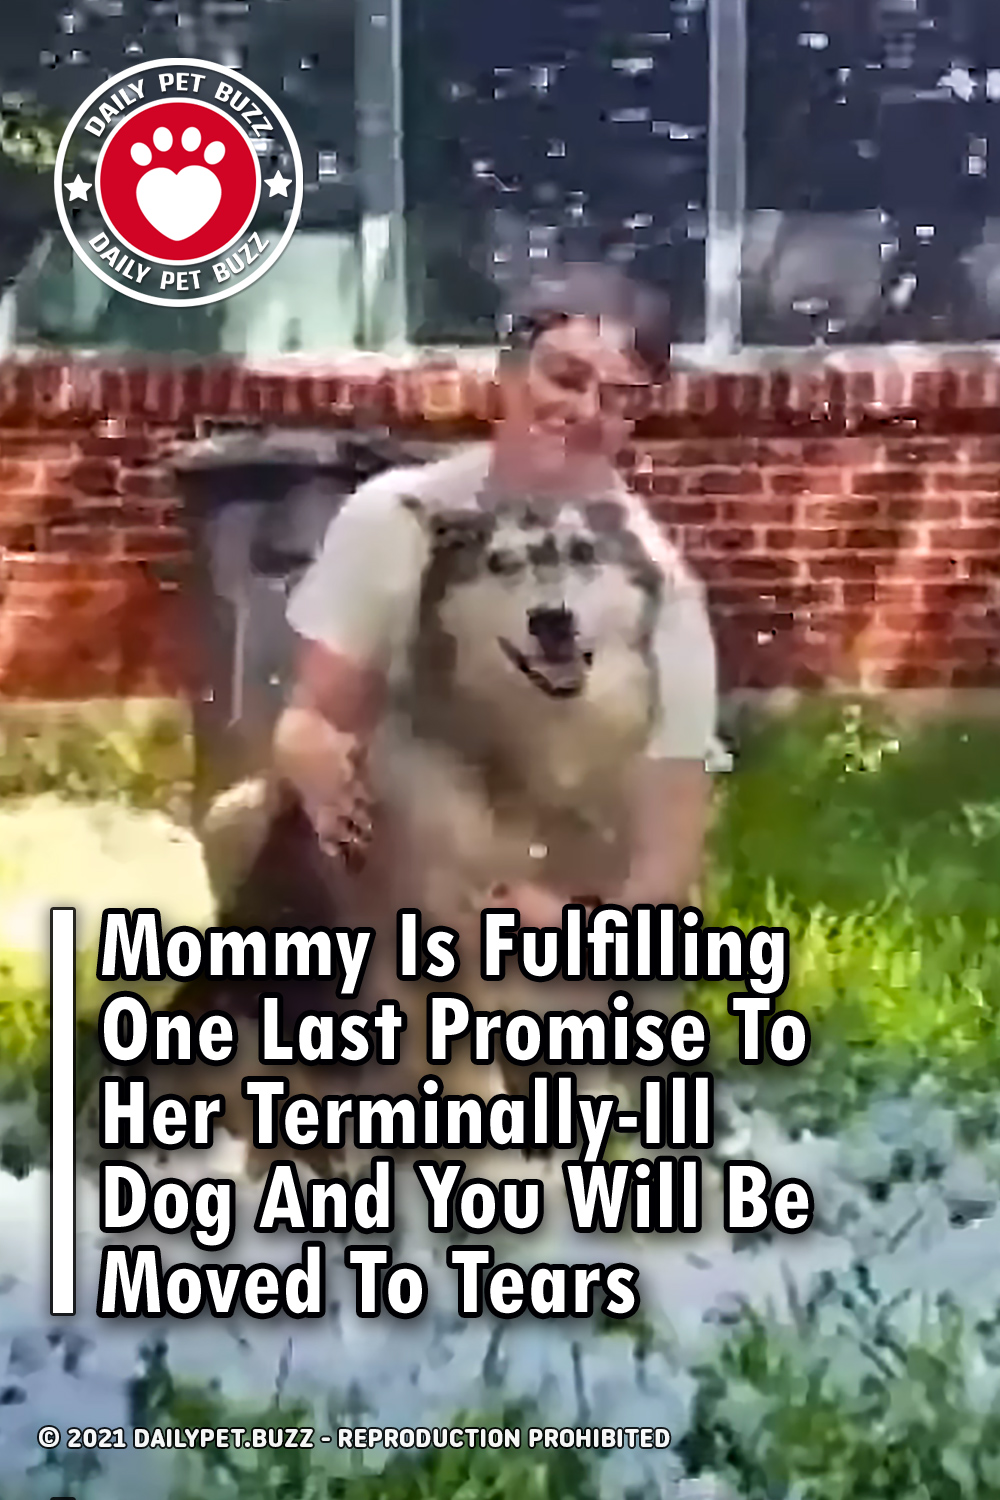 Mommy Is Fulfilling One Last Promise To Her Terminally-Ill Dog And You Will Be Moved To Tears